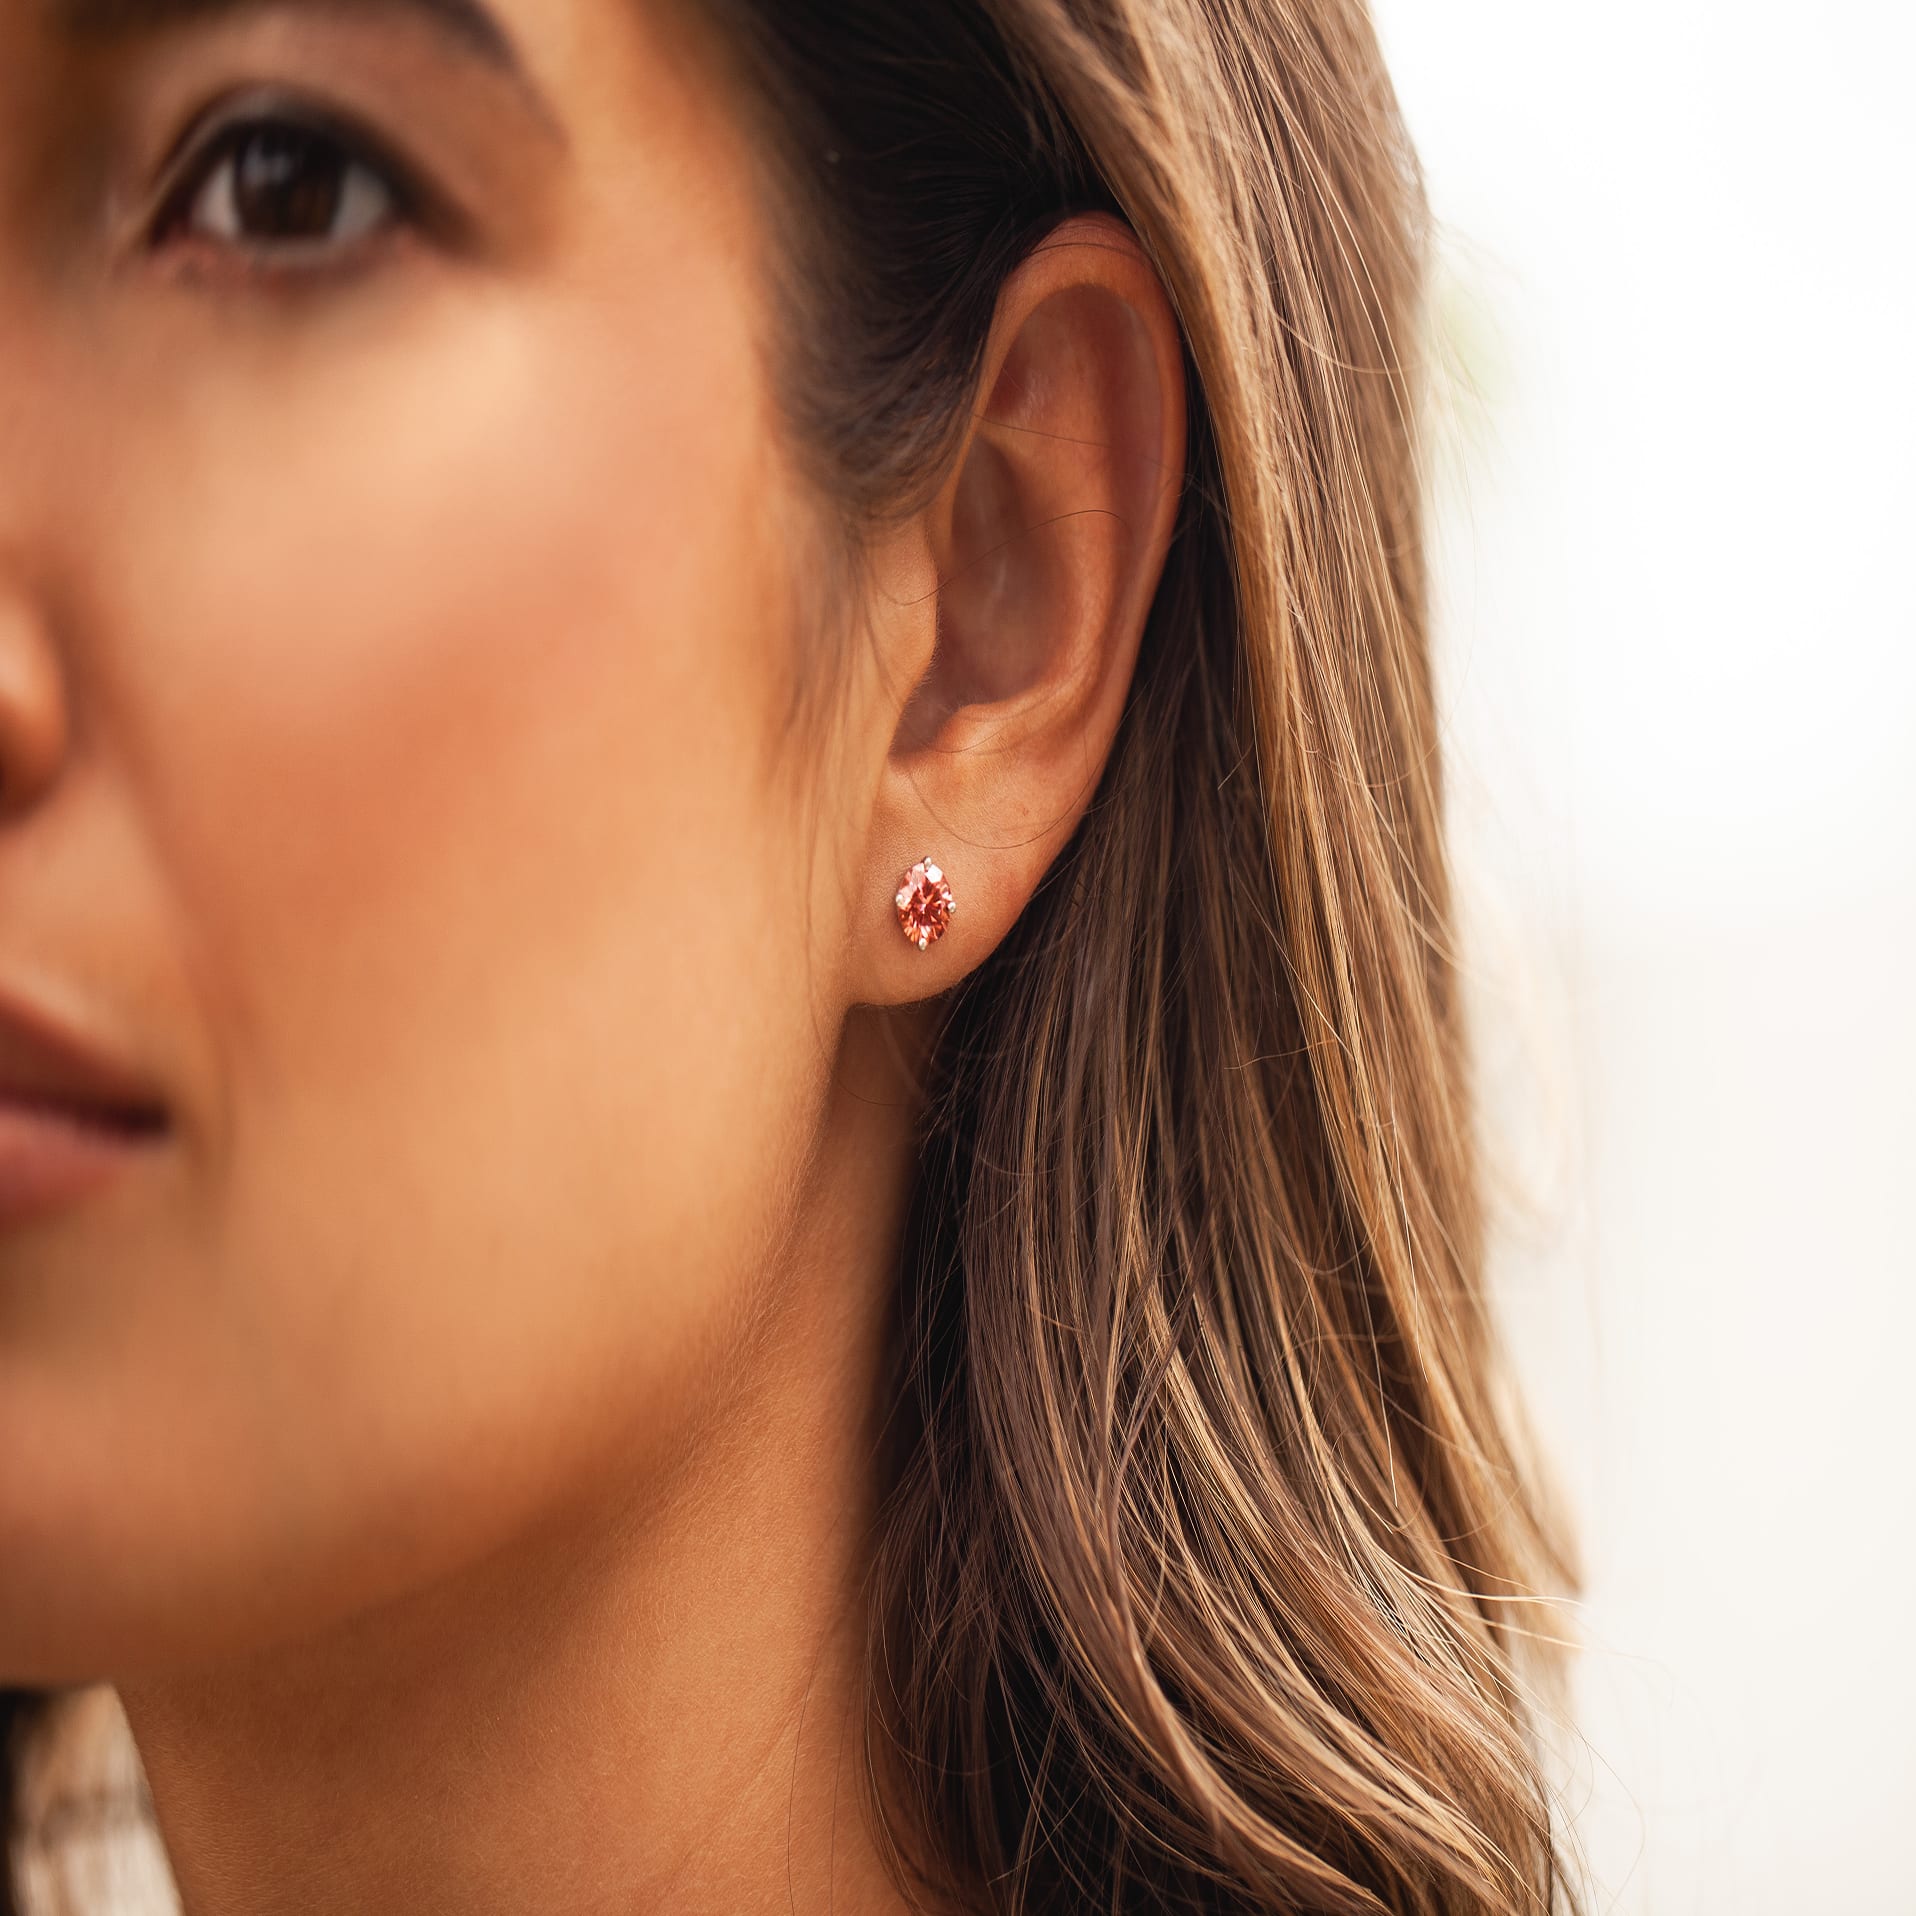 Whether you prefer dangle, hoop or stud earrings, lab grown diamonds offer  elegant and fashionable earrings to complete your wardrobe.